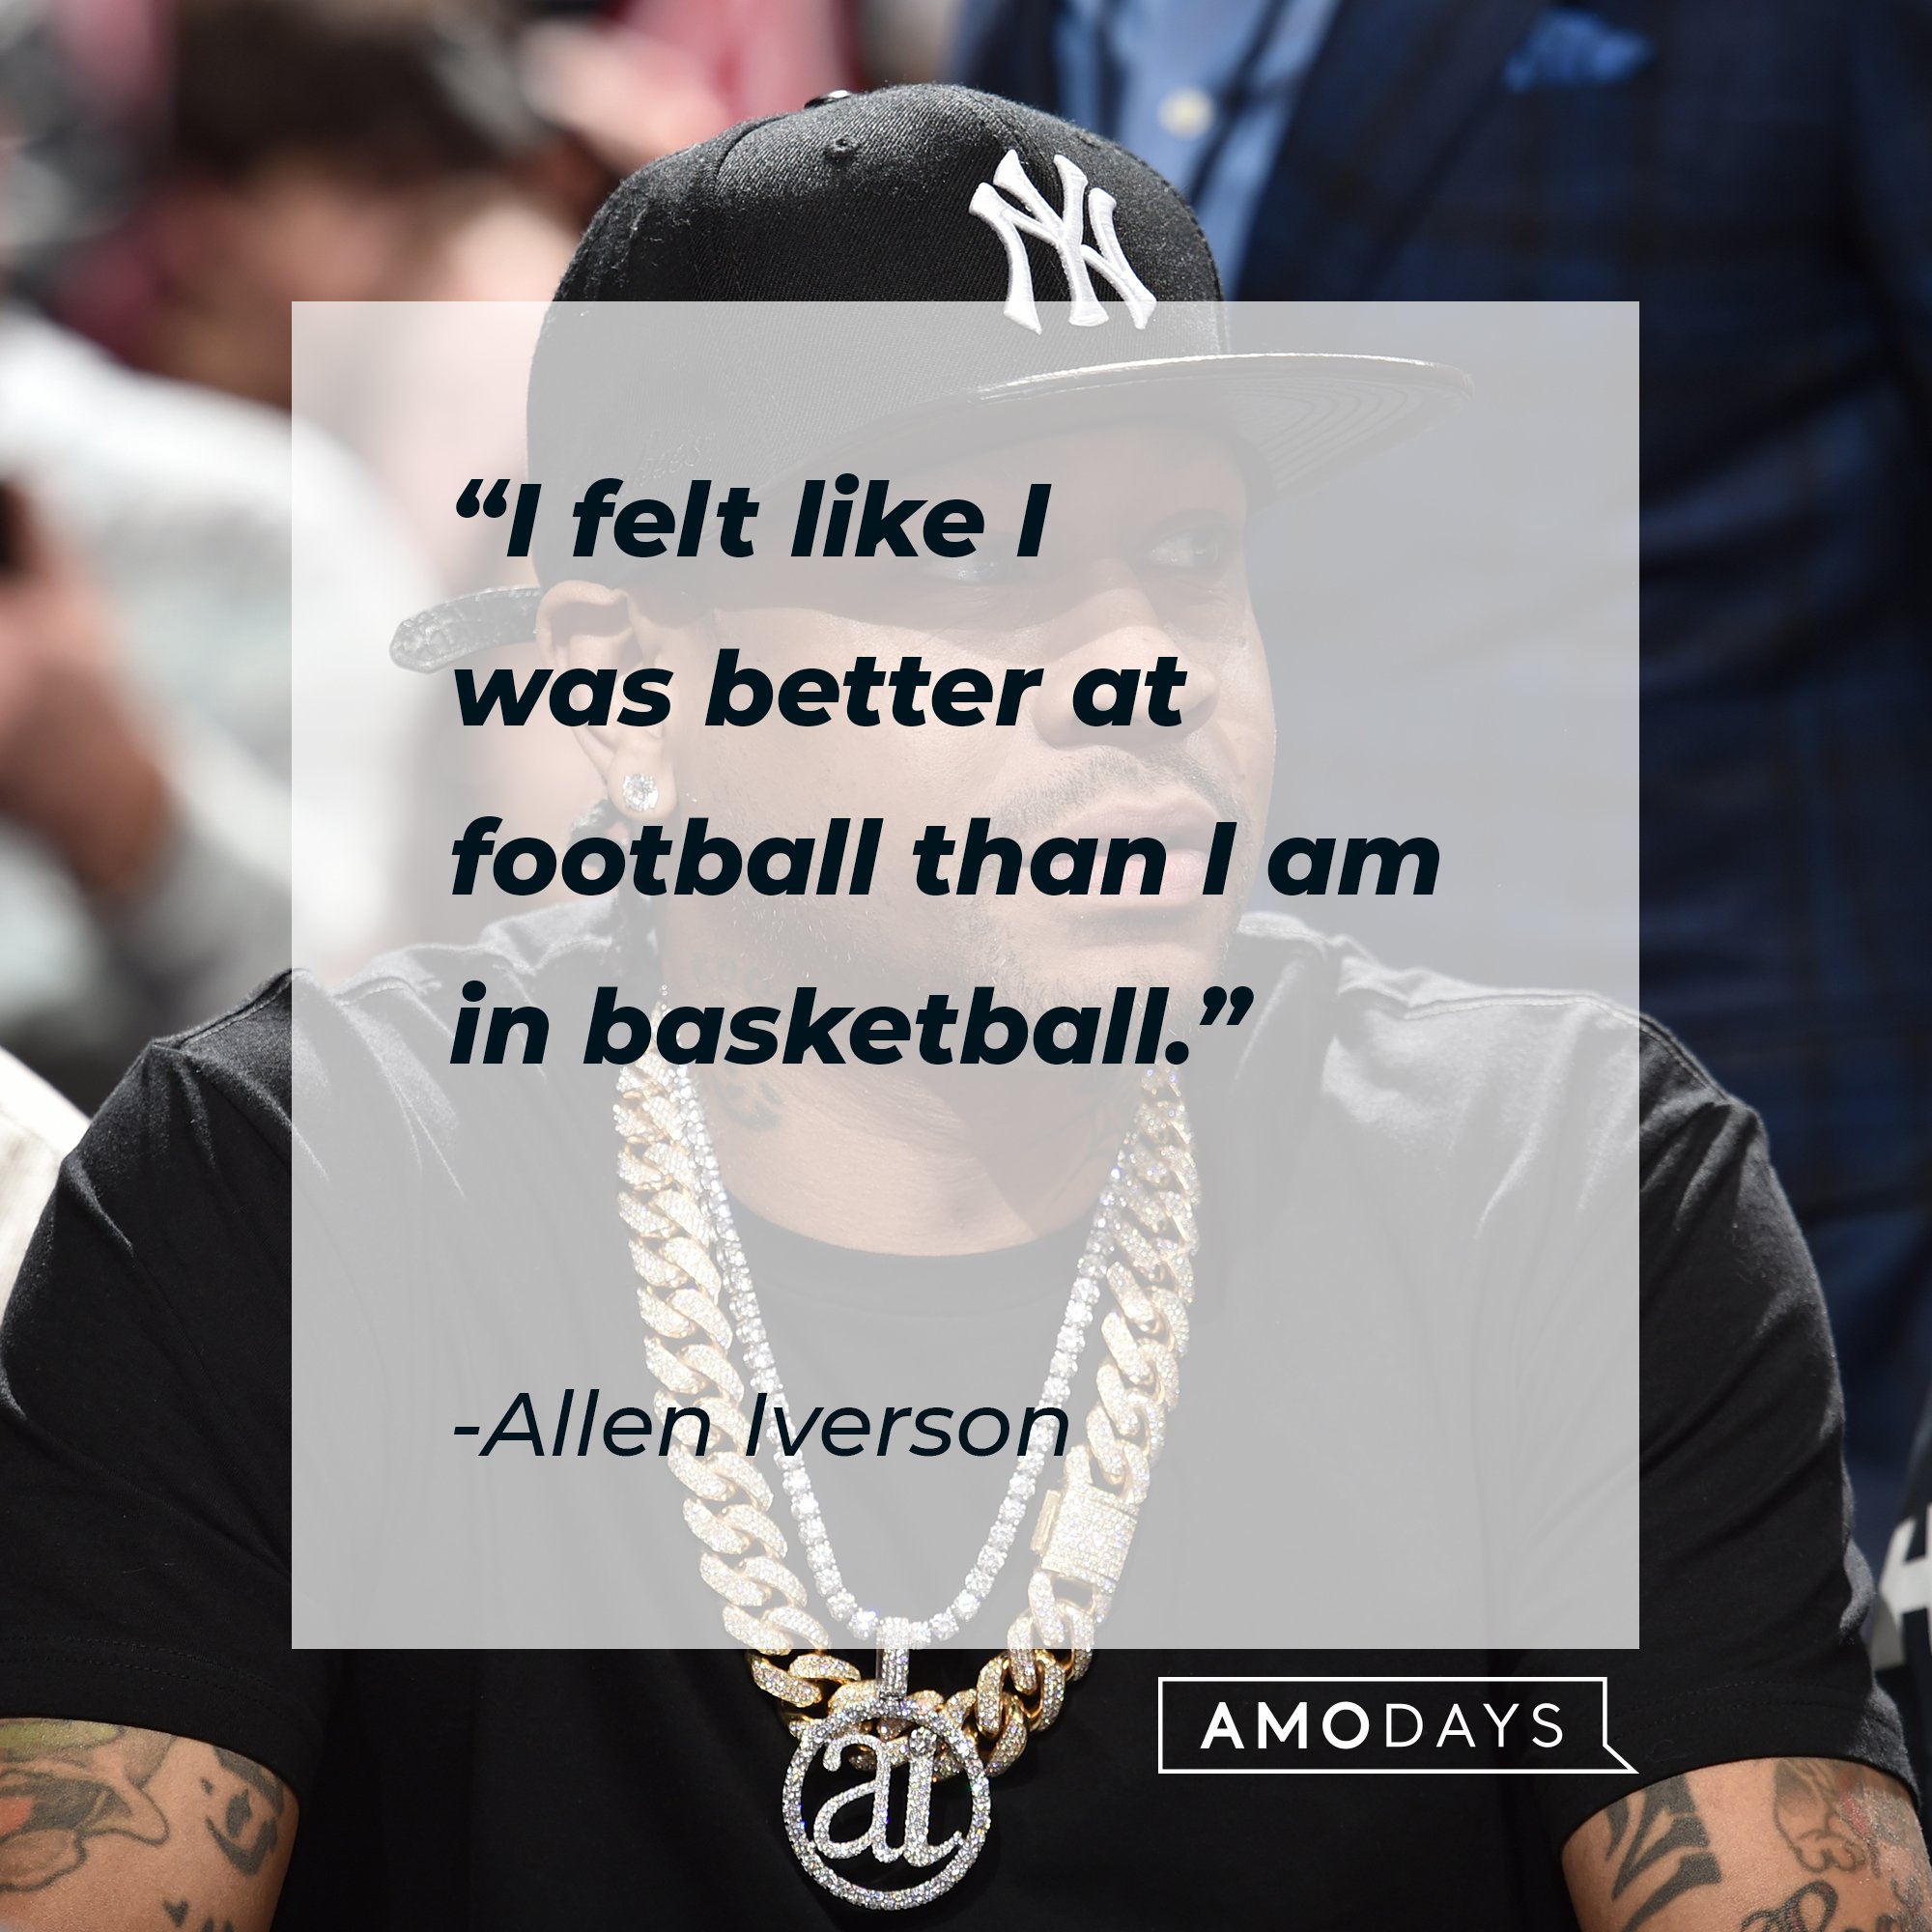 Allen Iverson's quote: "I felt like I was better at football than I am in basketball." | Image: AmoDays